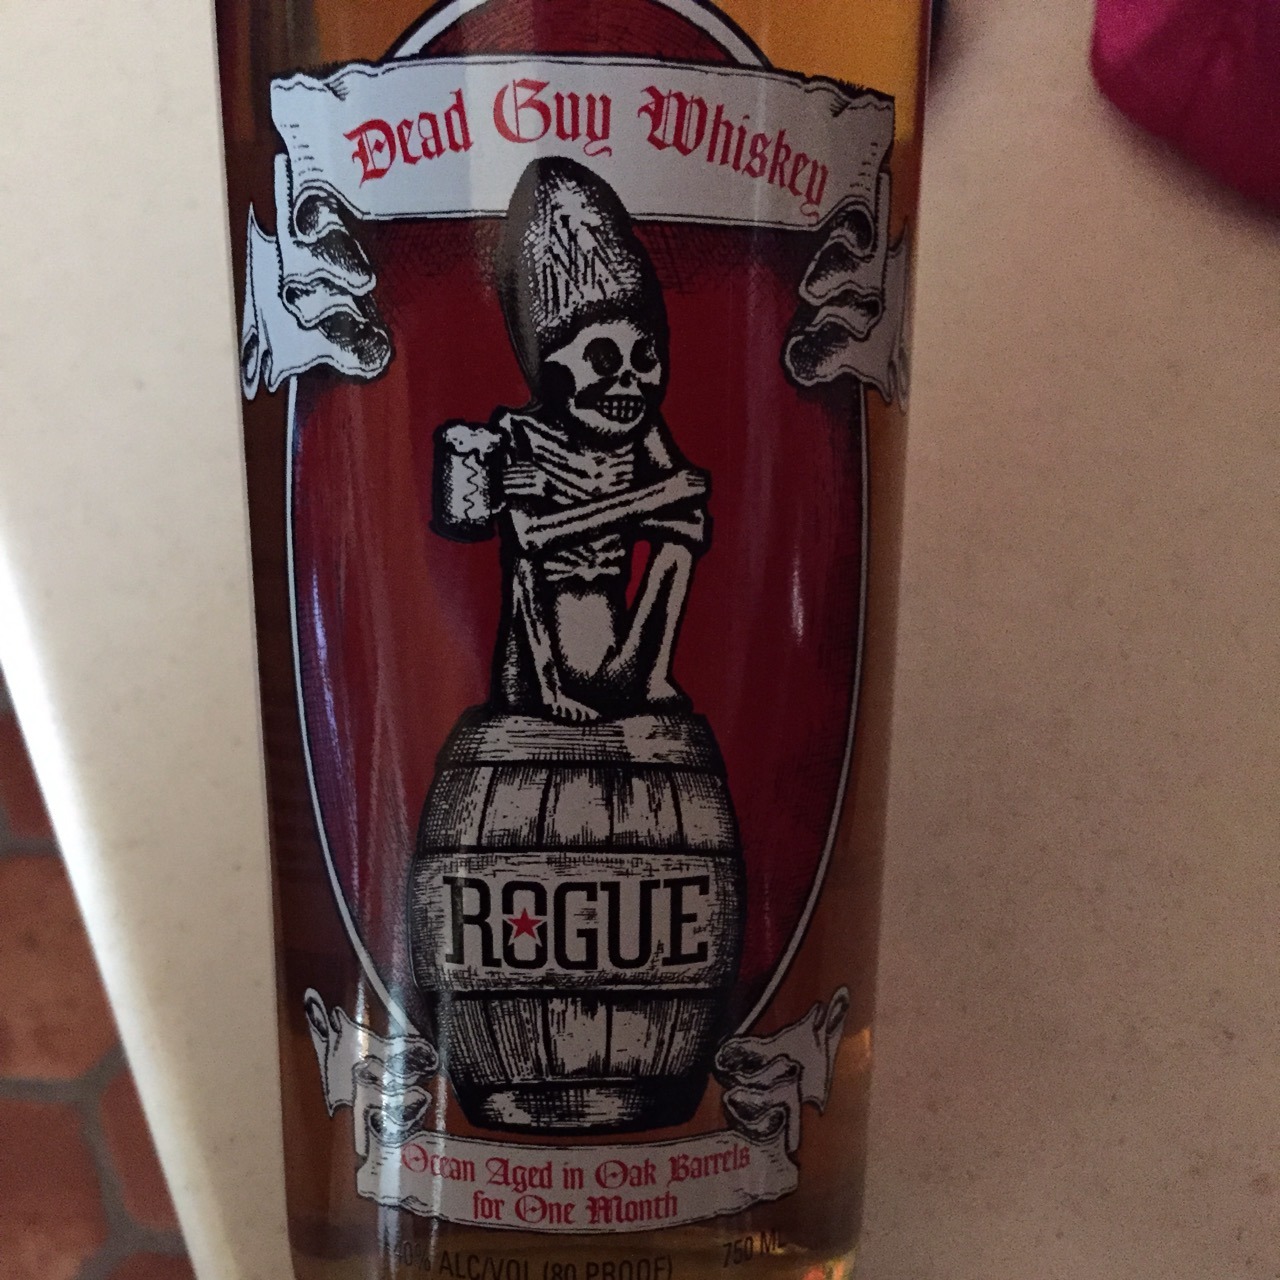 Dead Guy Whiskey – Rogue